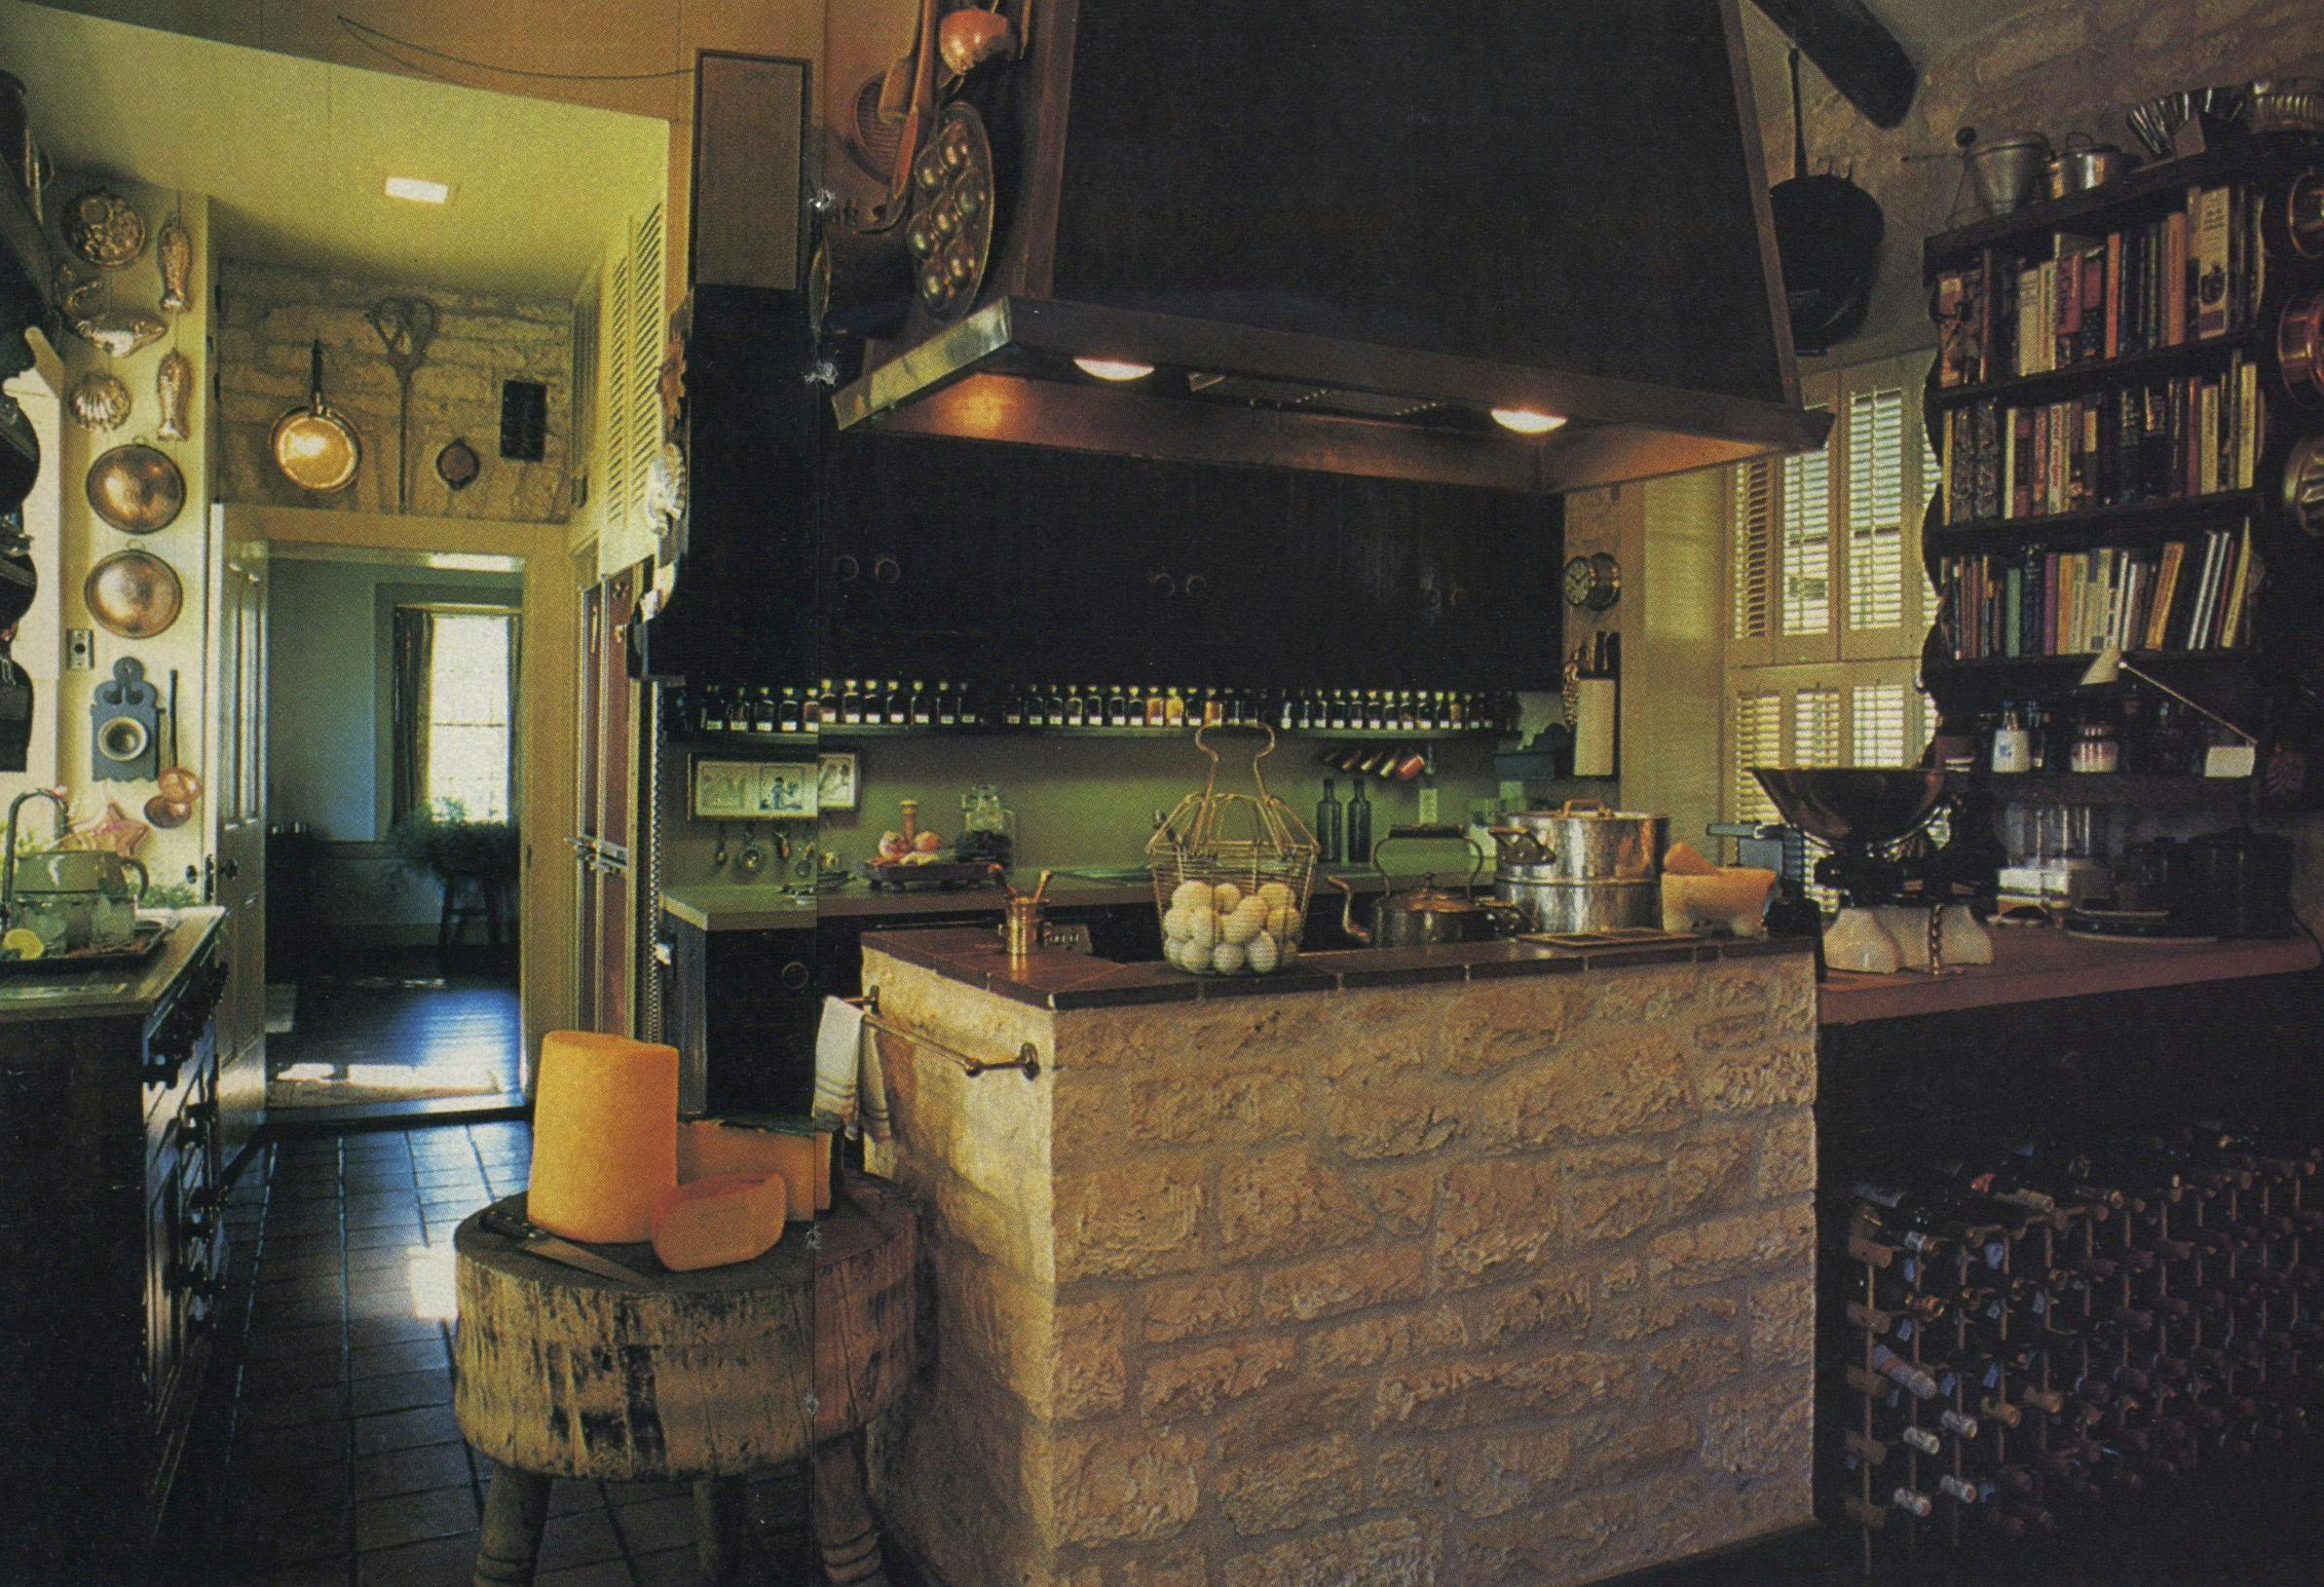 Most living and entertaining take place in the combination kitchen and informal living room (behind camera, not shown), a prime example of what Bell means by treating a house with "sympathy if not honesty": The beams in the ceiling were originally in the floor, the iron stove under the copper-accented hood came from a girl's school, and the stone in the room divider was salvaged from an old smokehouse that once stood on the property.